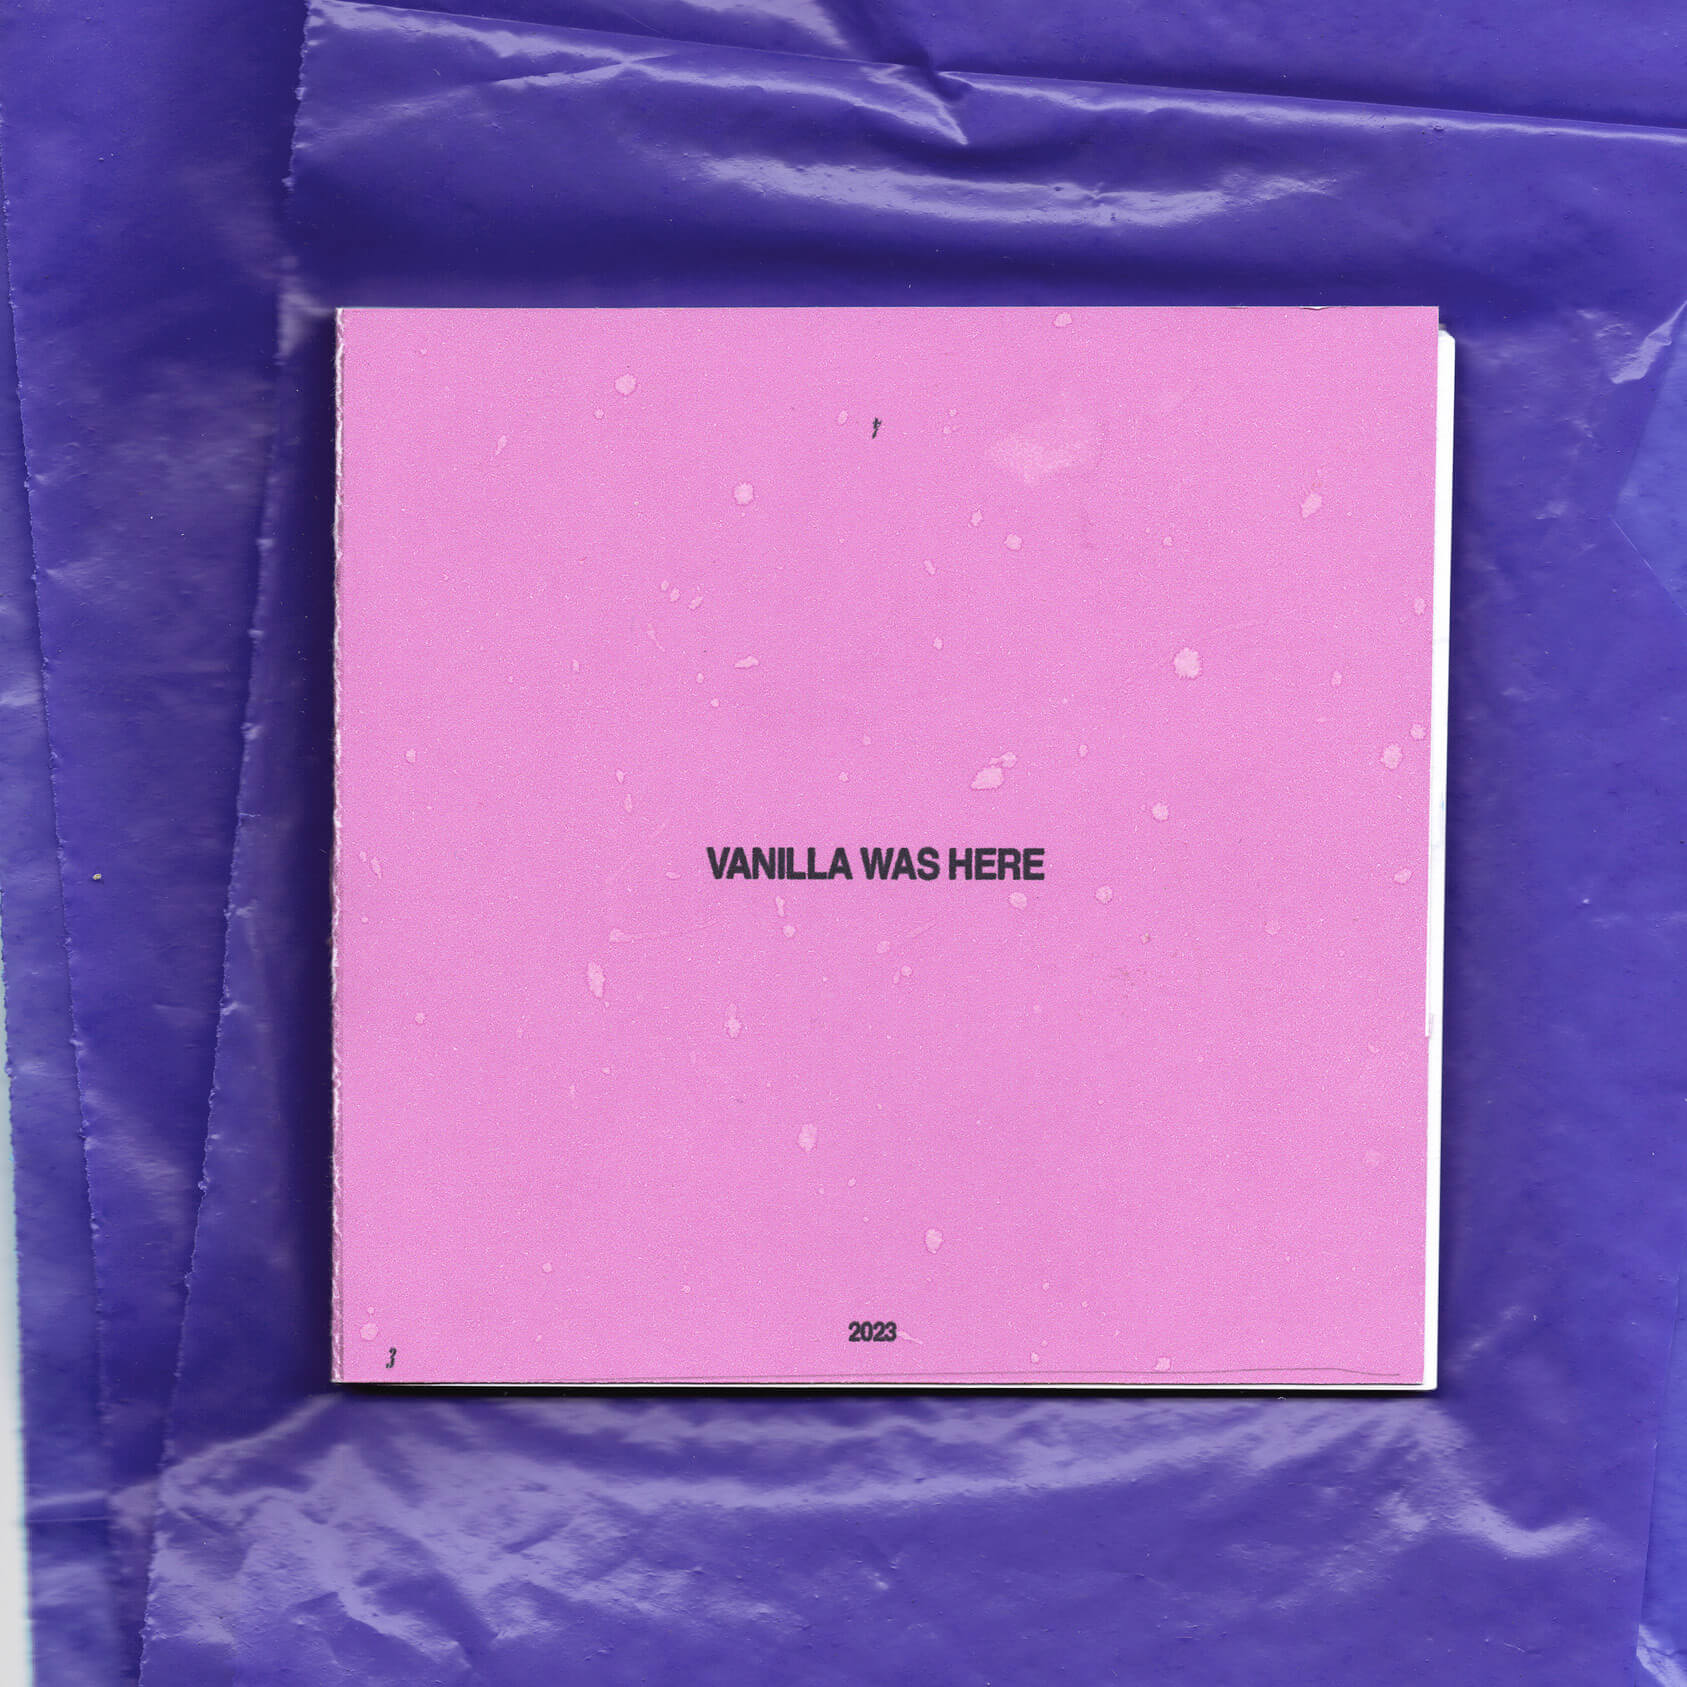 Pink album cover on a purple background.